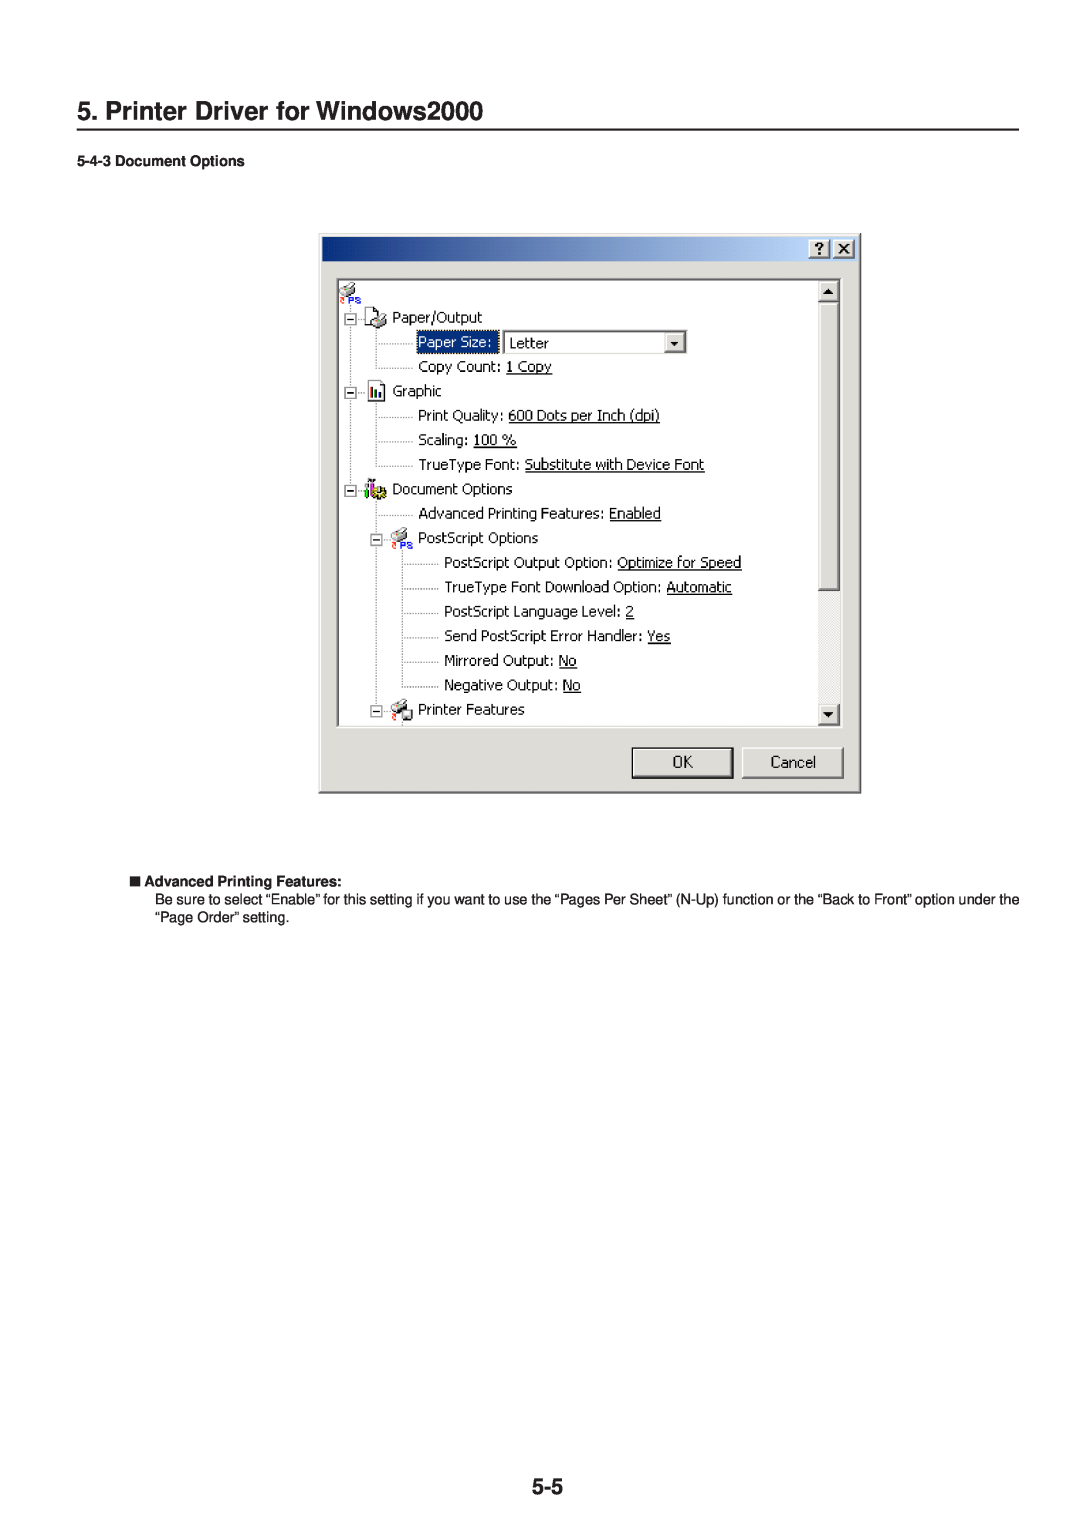 IBM Printing System Printer Driver for Windows2000, Document Options Advanced Printing Features, “Page Order” setting 